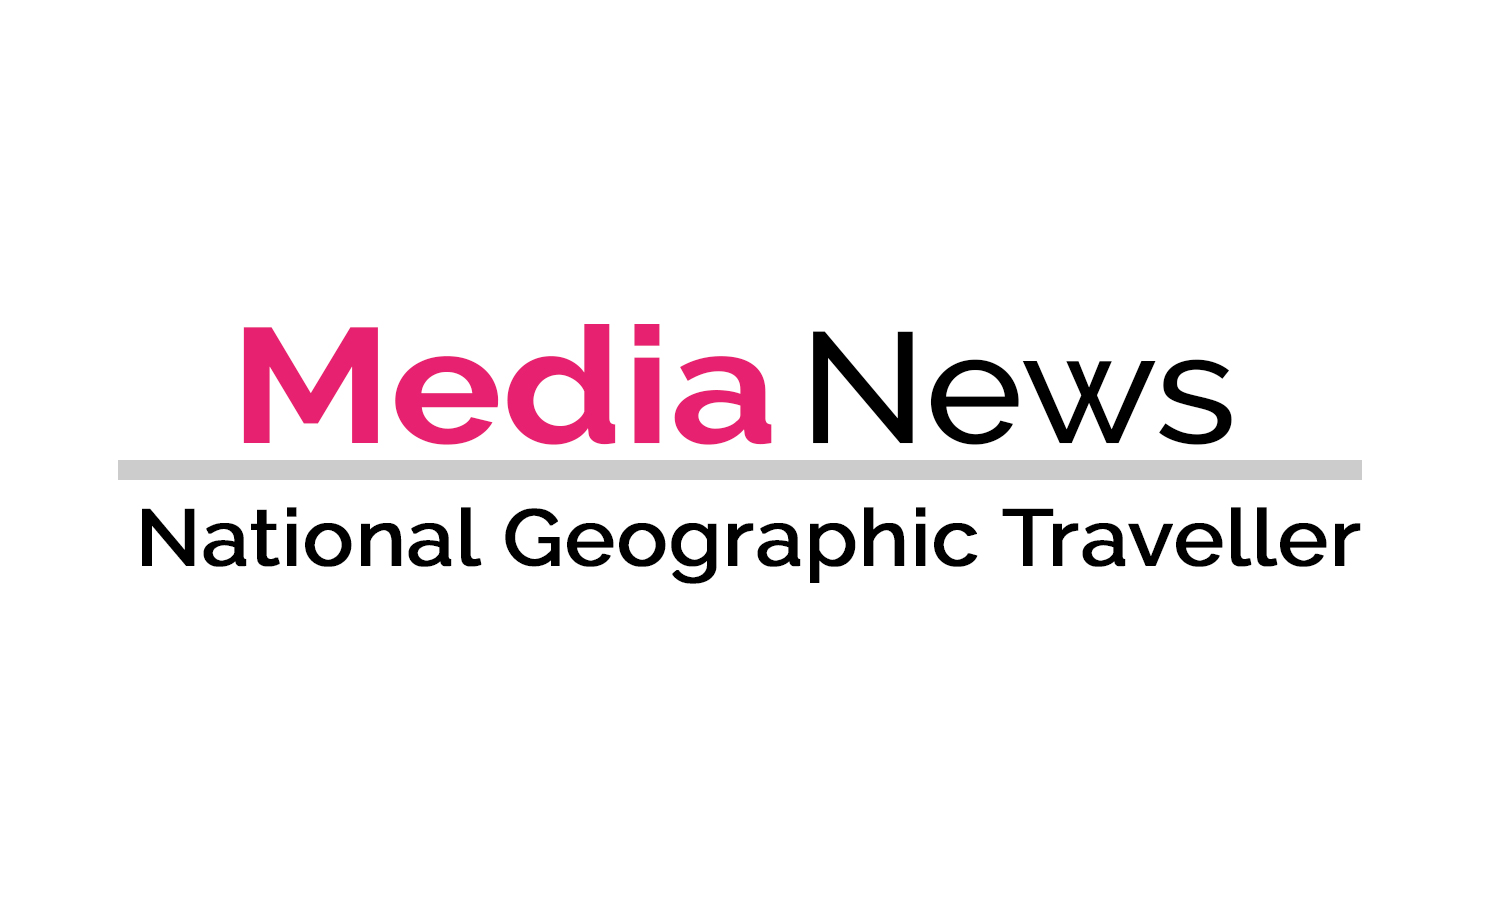 National Geographic Traveller appoints deputy branded content manager